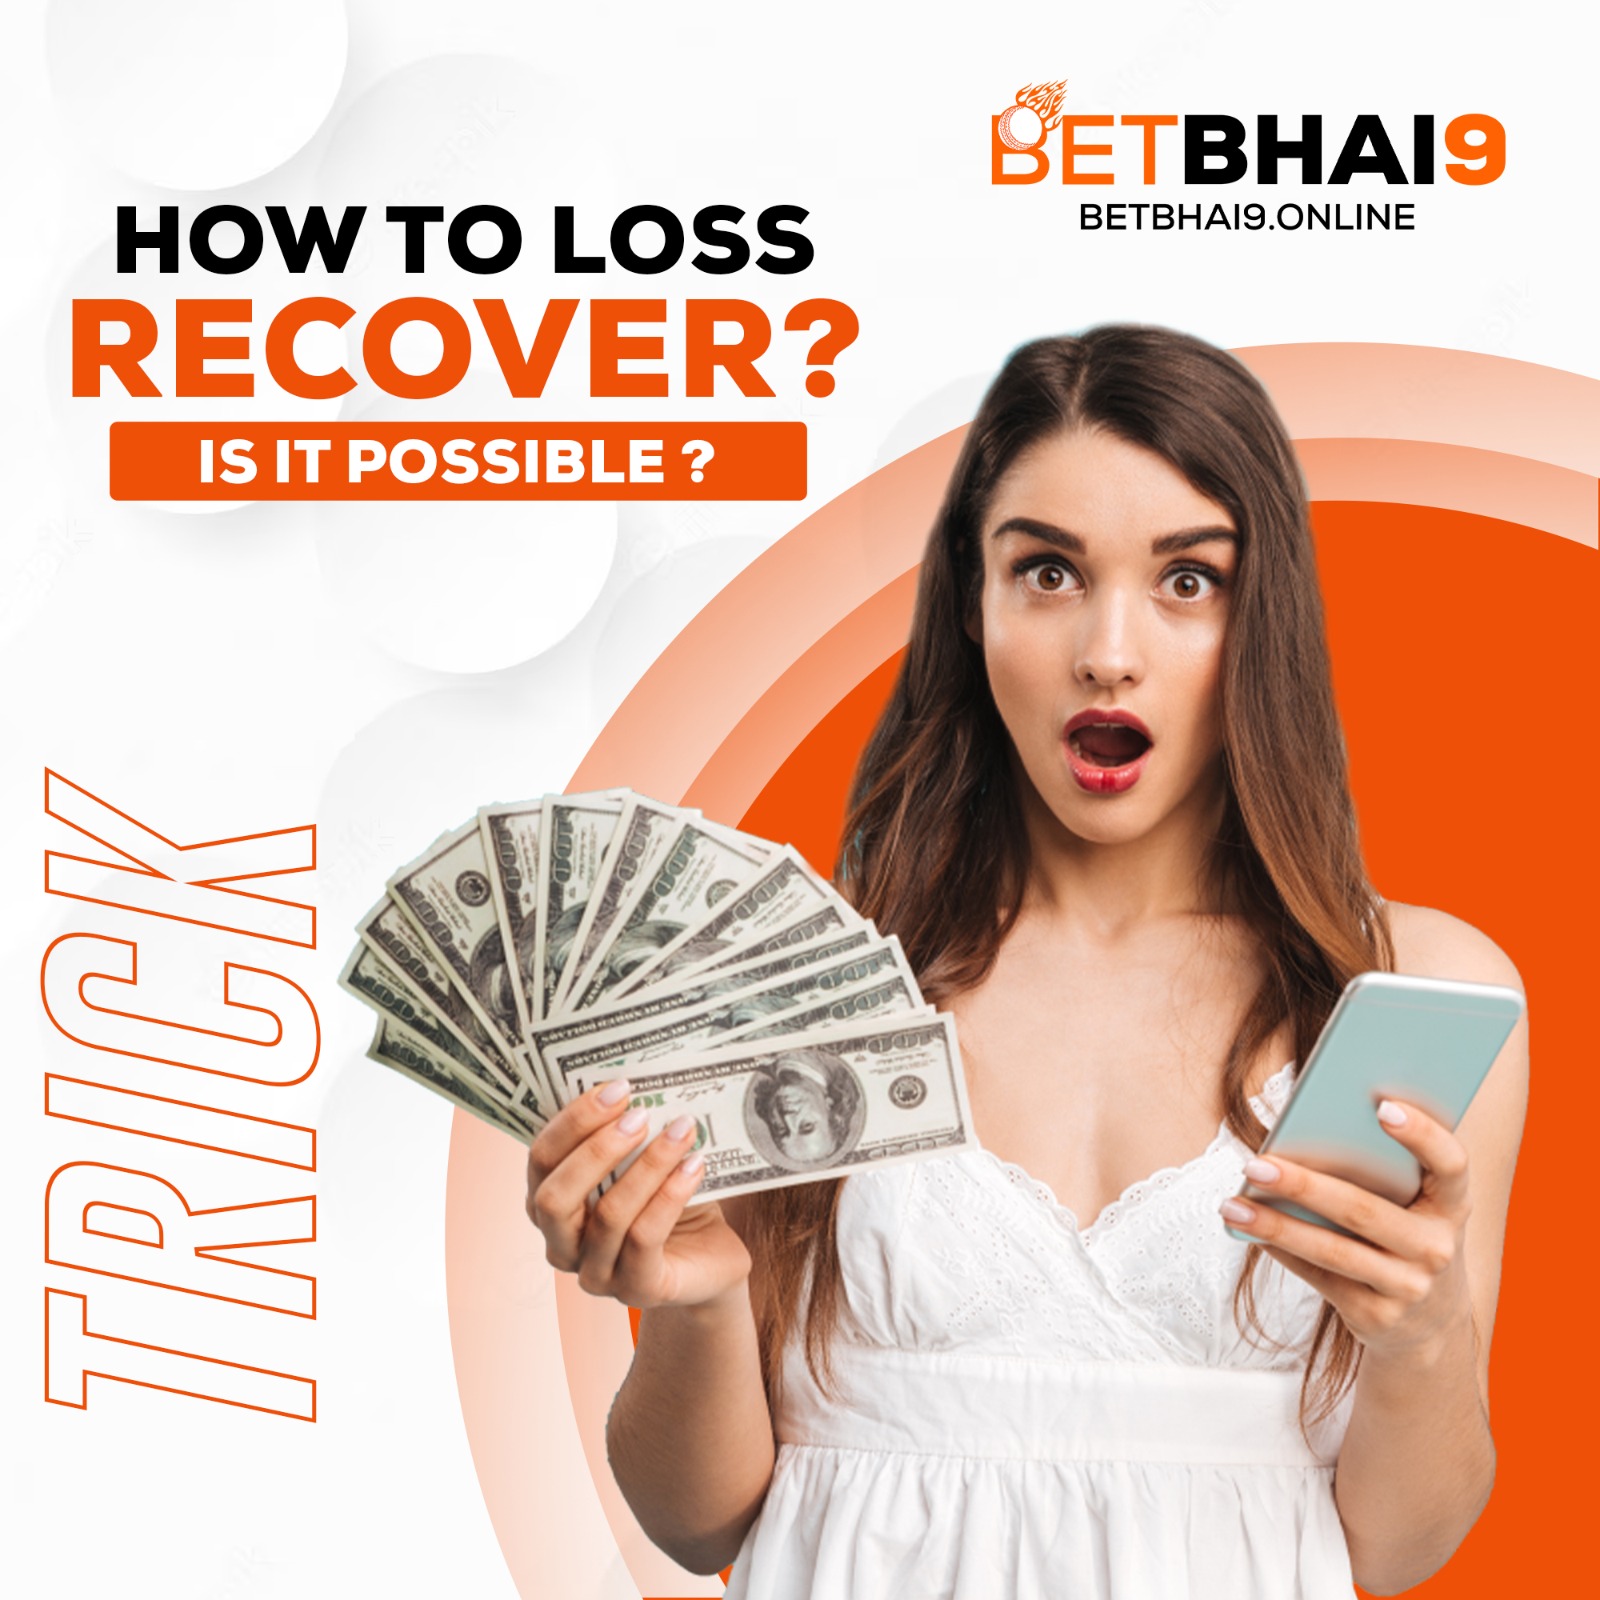 betbhai9 loss recover